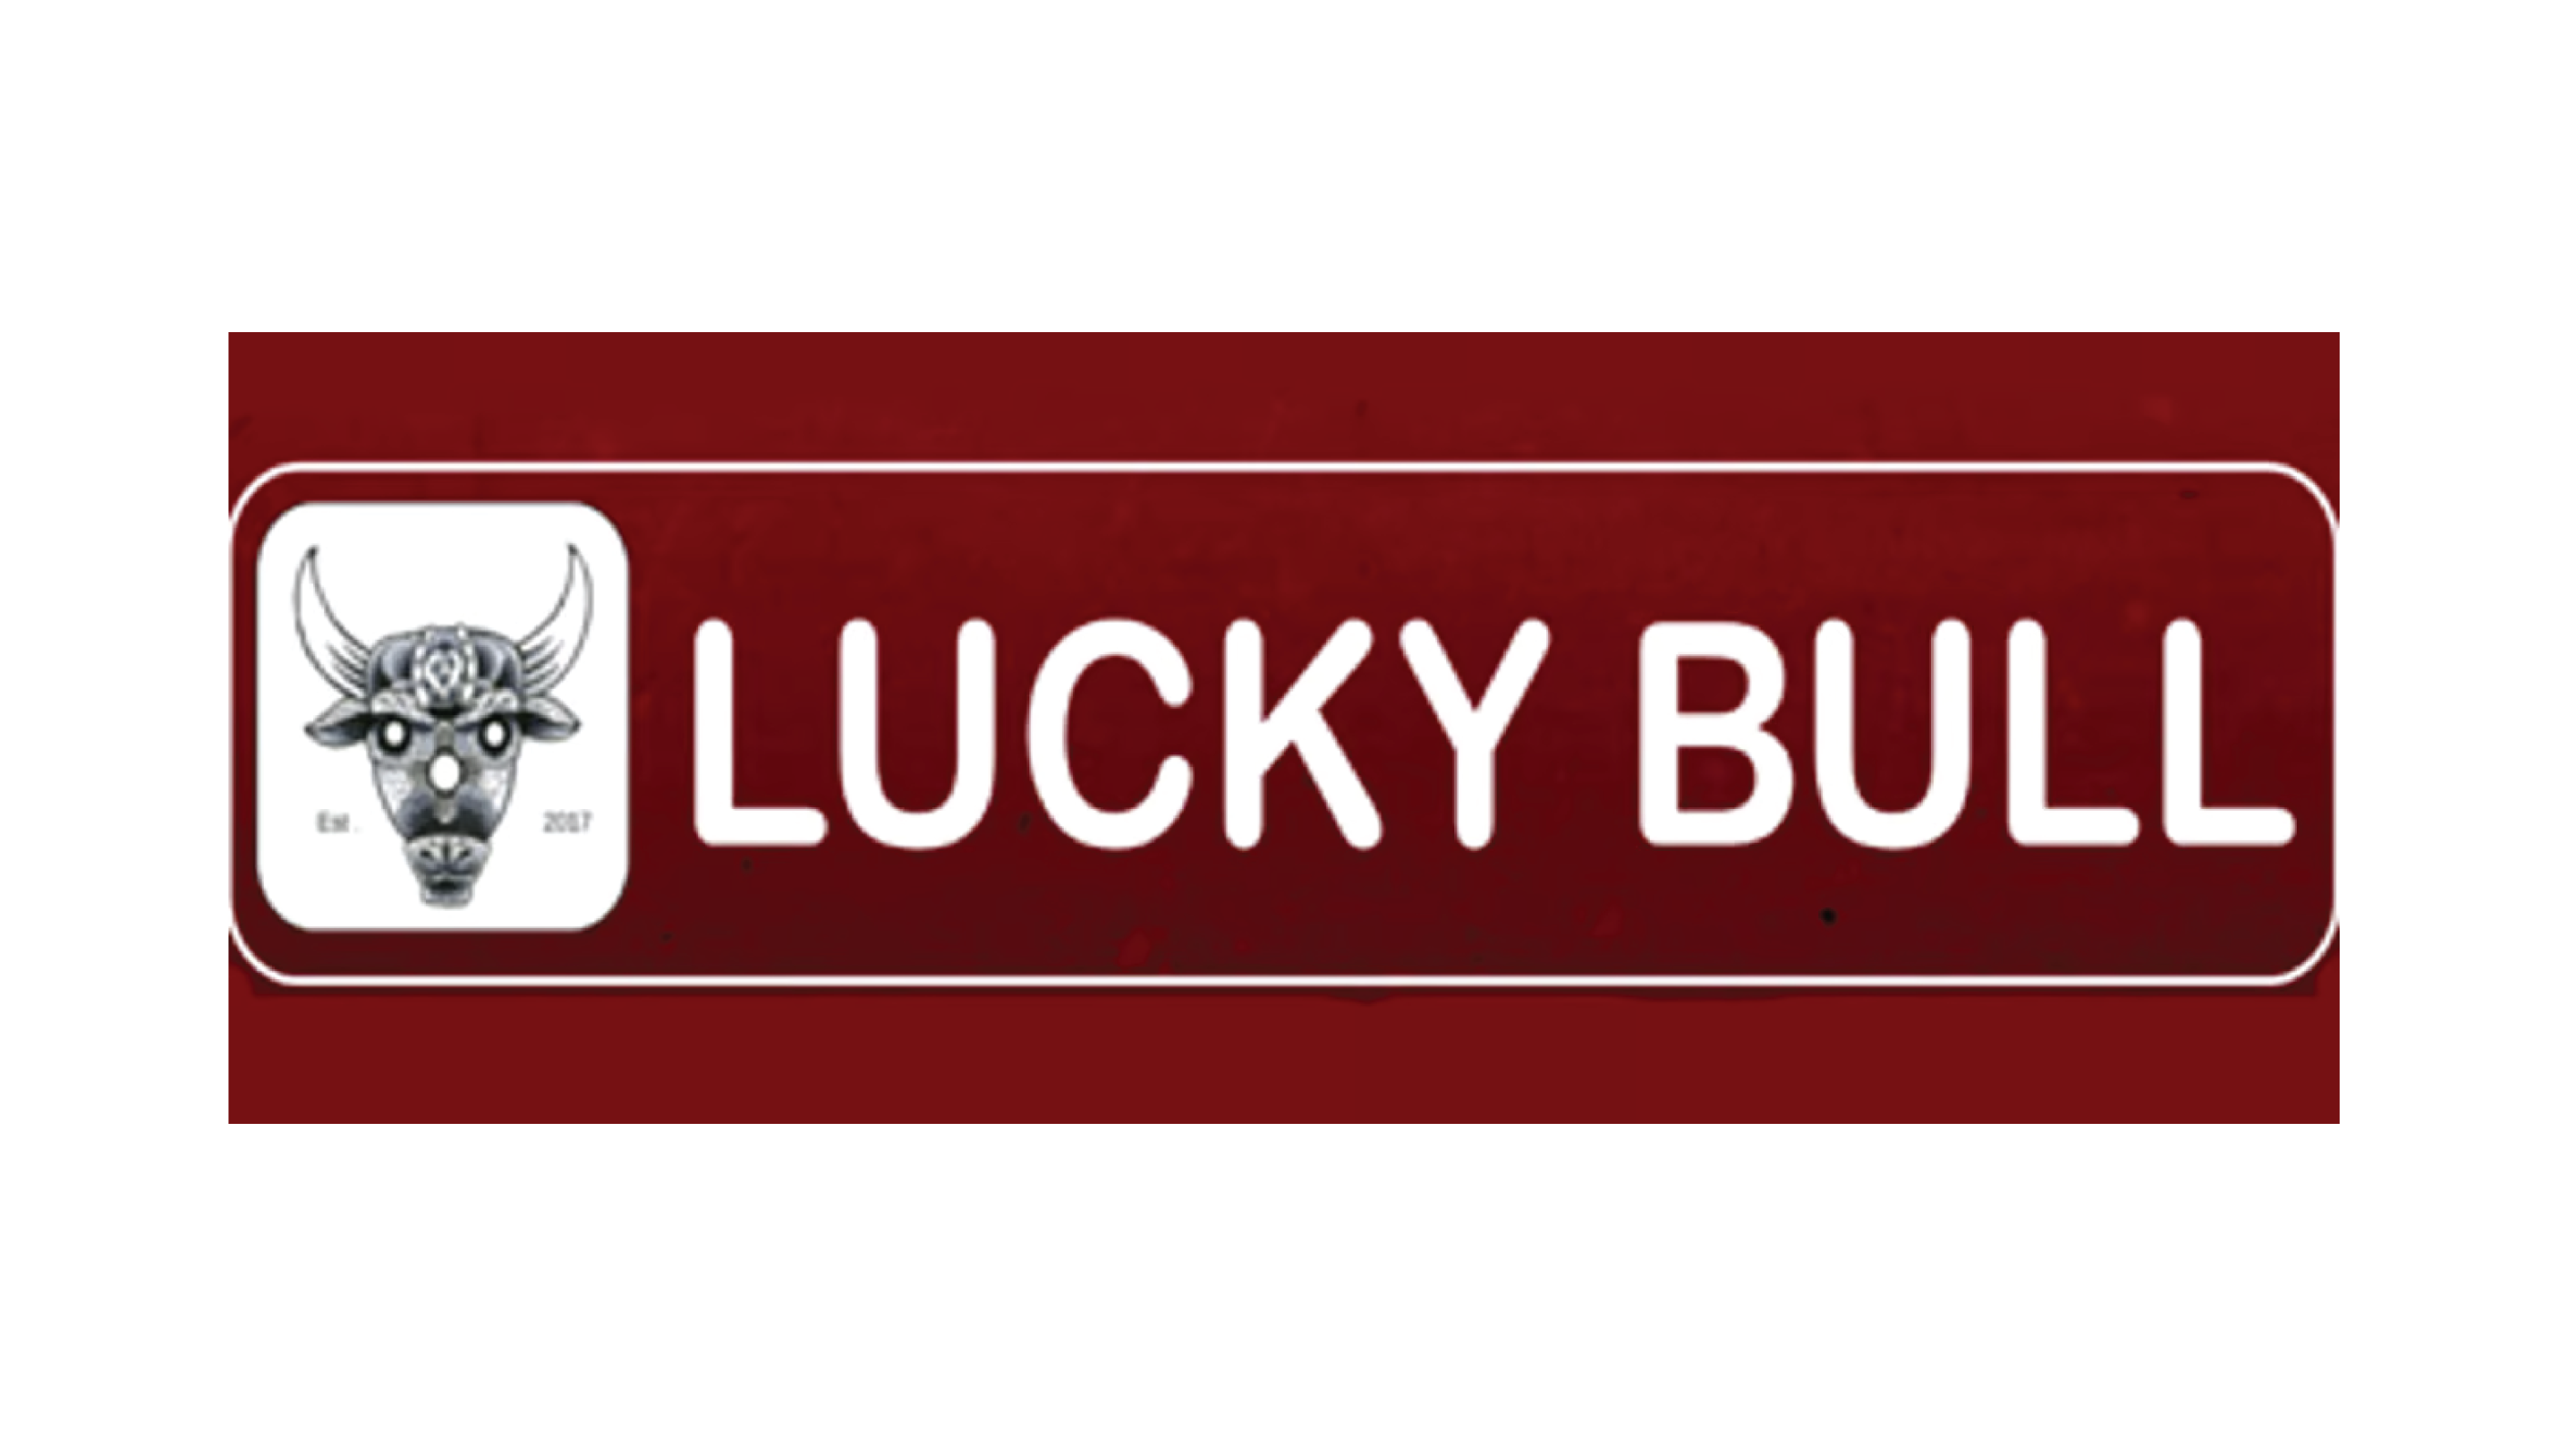 The Lucky Bull's Image